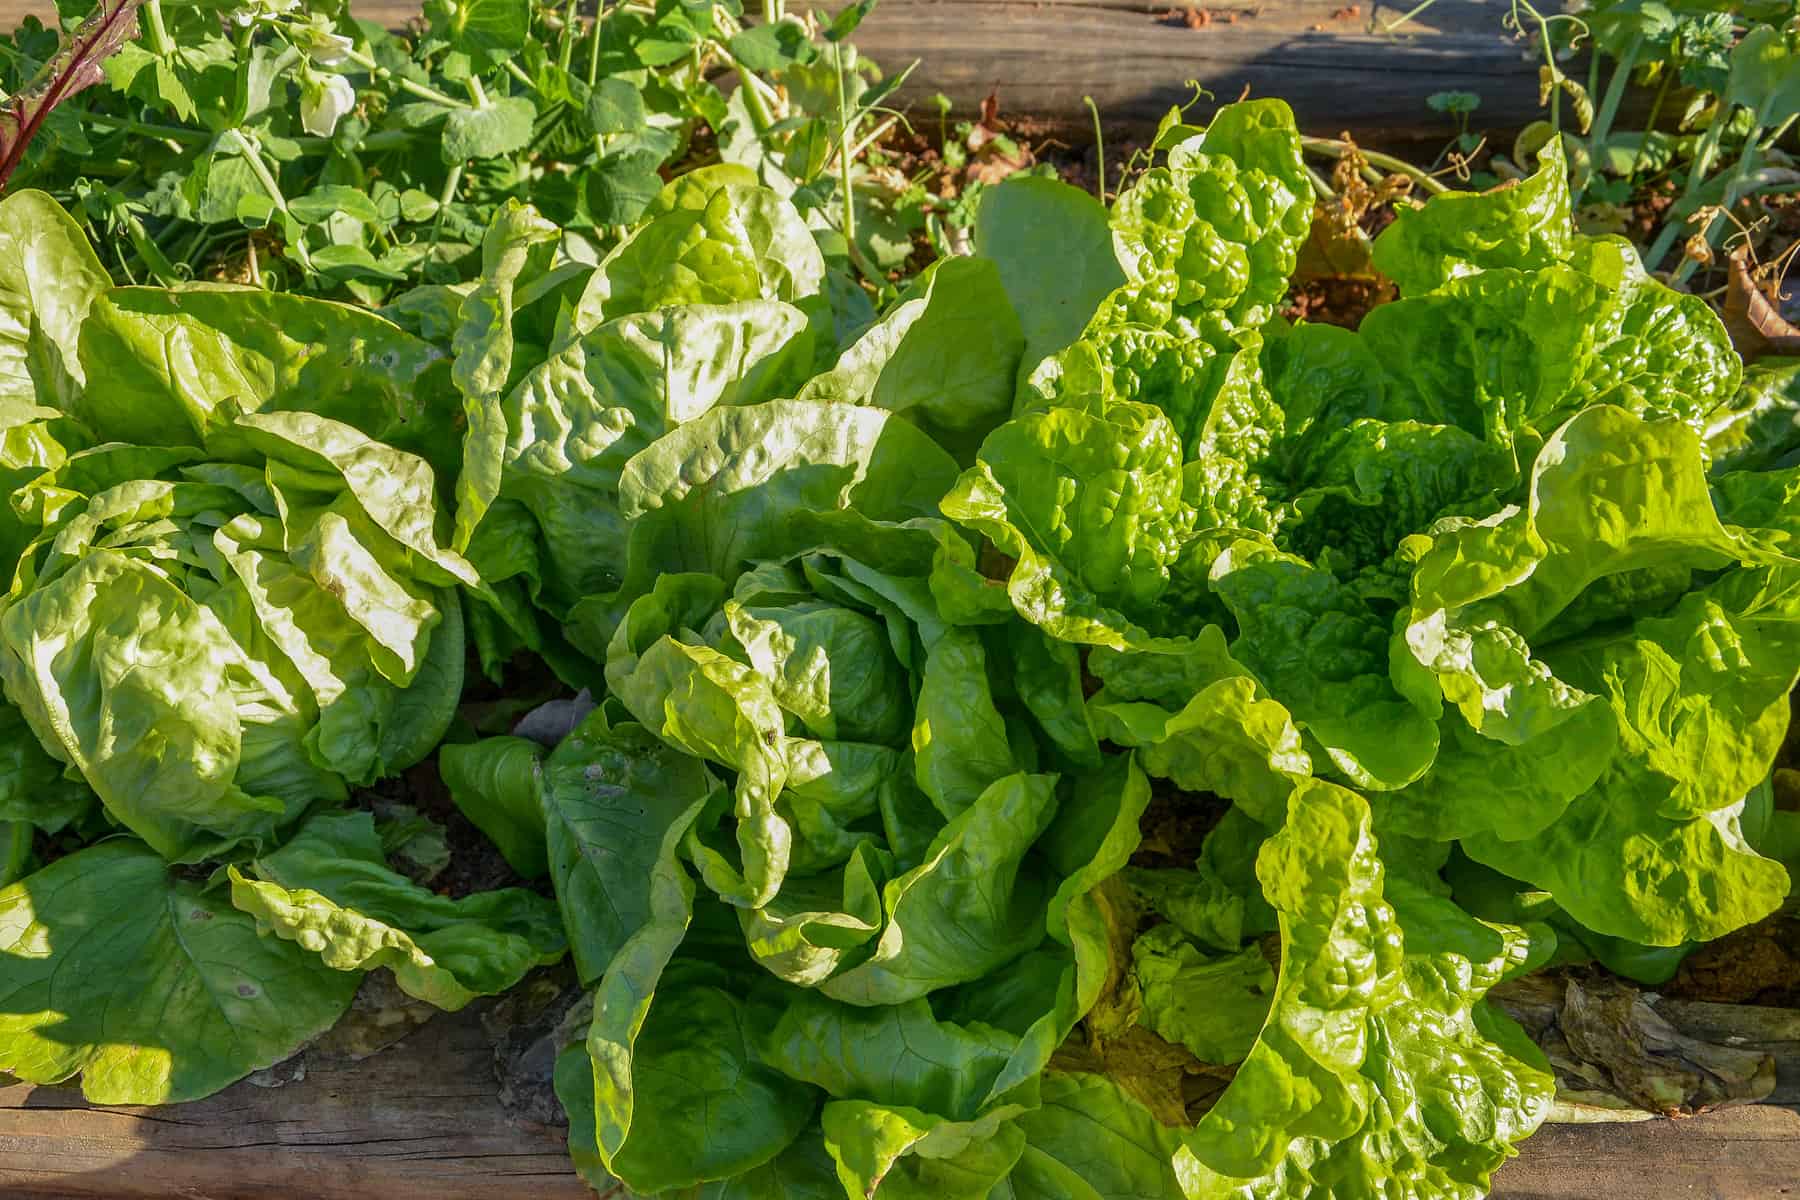 Buttercrunch lettuces growing in a raised bed